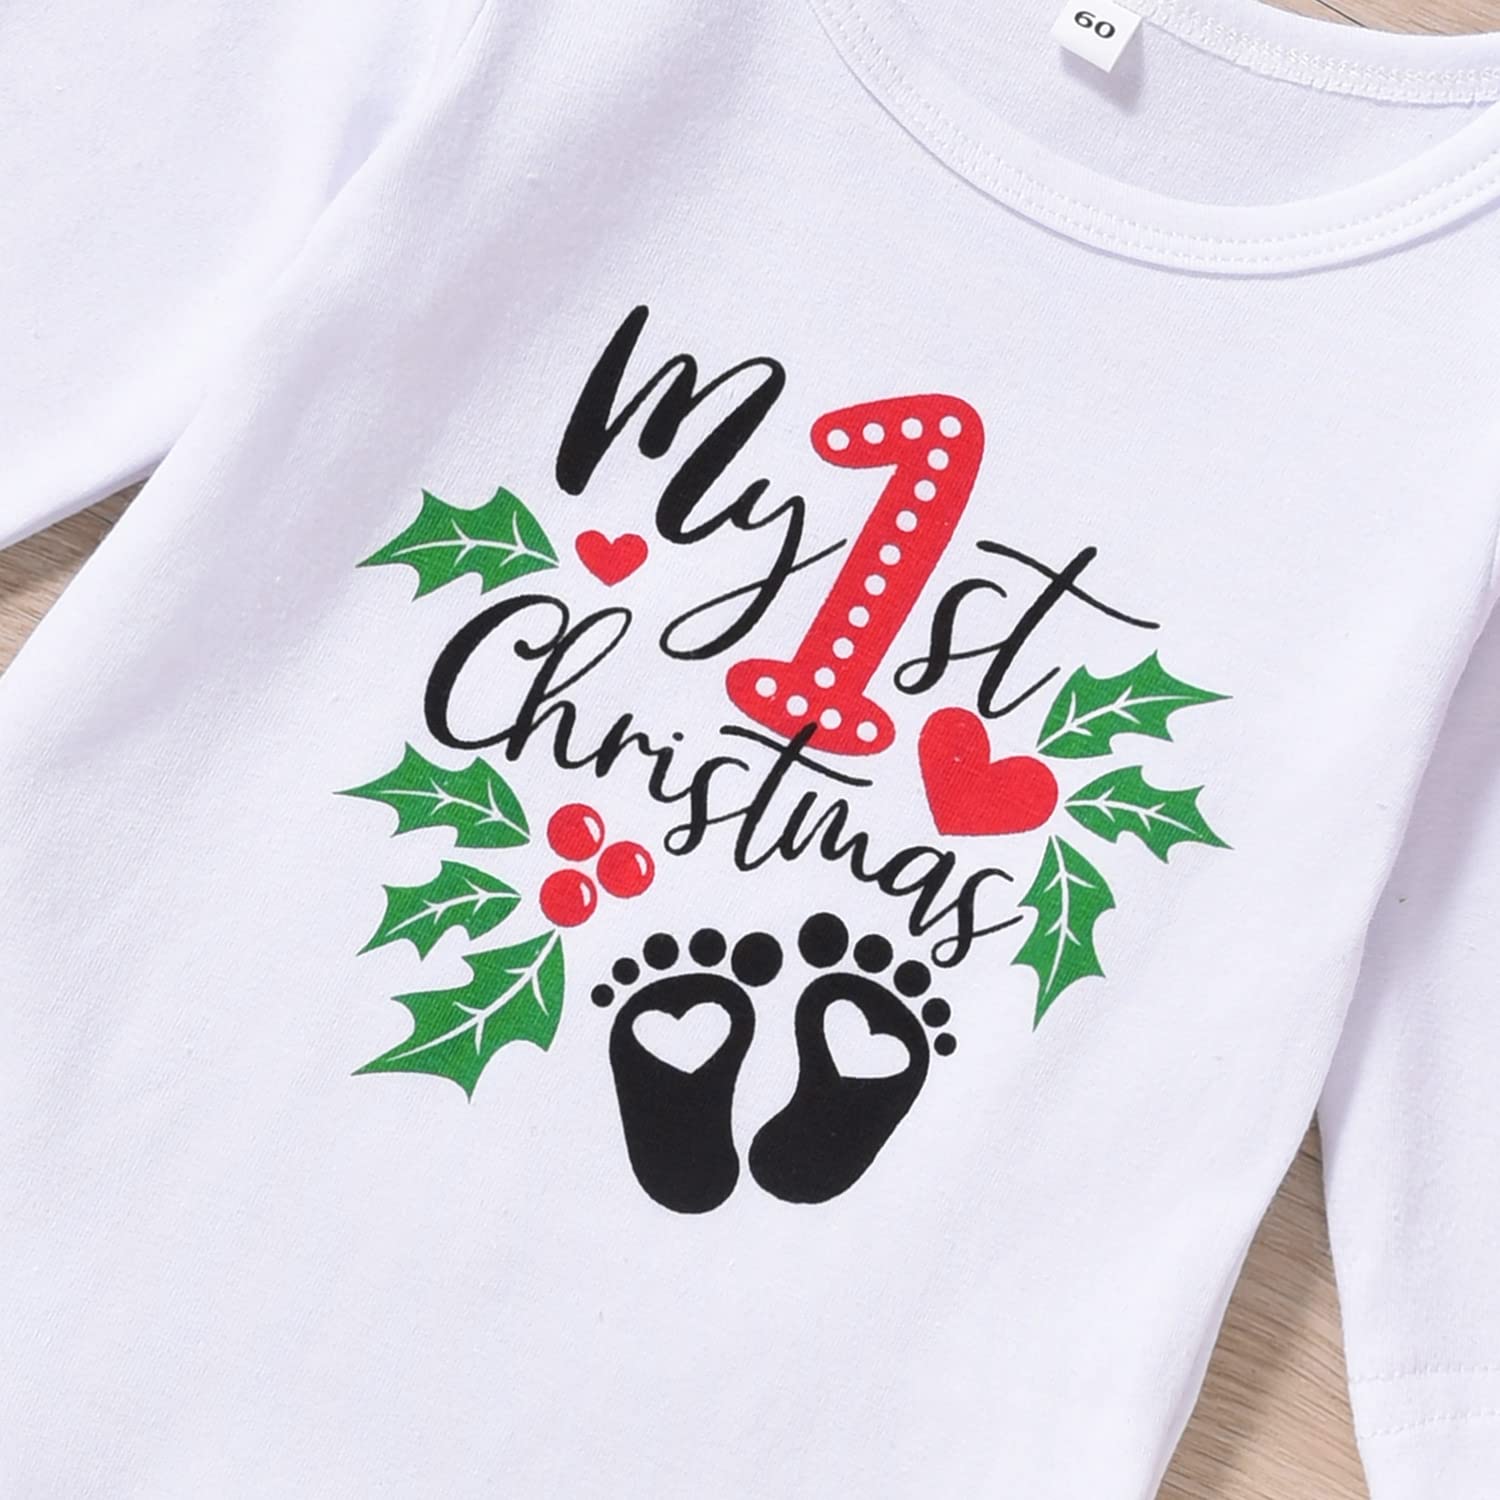 Aalizzwell Newborn Infant Baby Boys Christmas Outfit